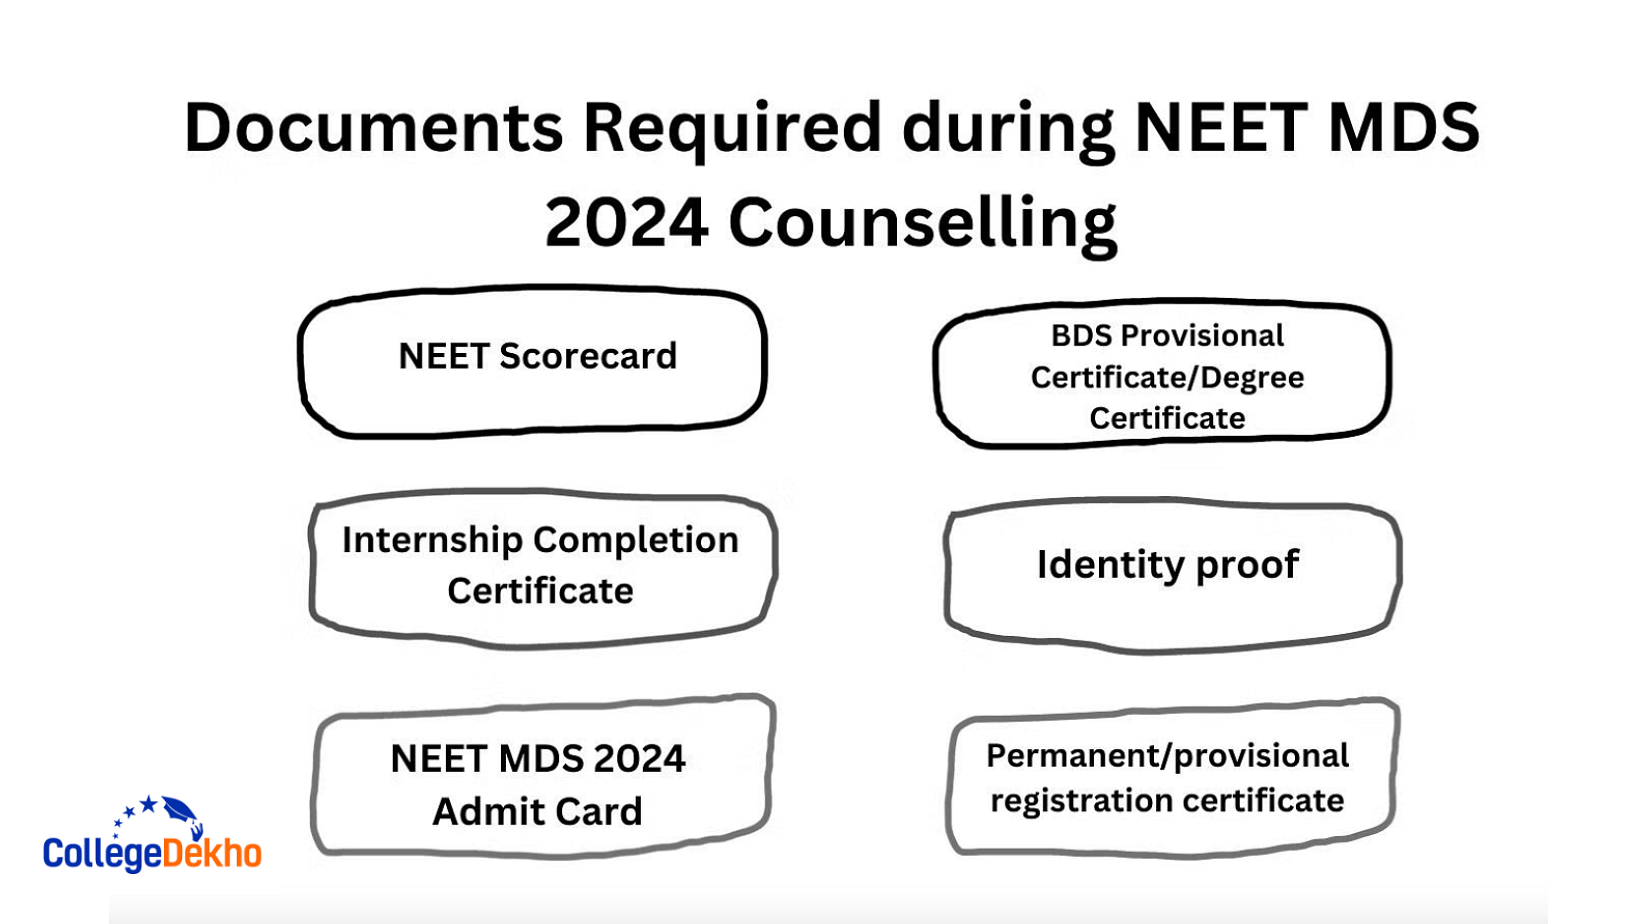 Documents Required for NEET MDS 2024 Counselling